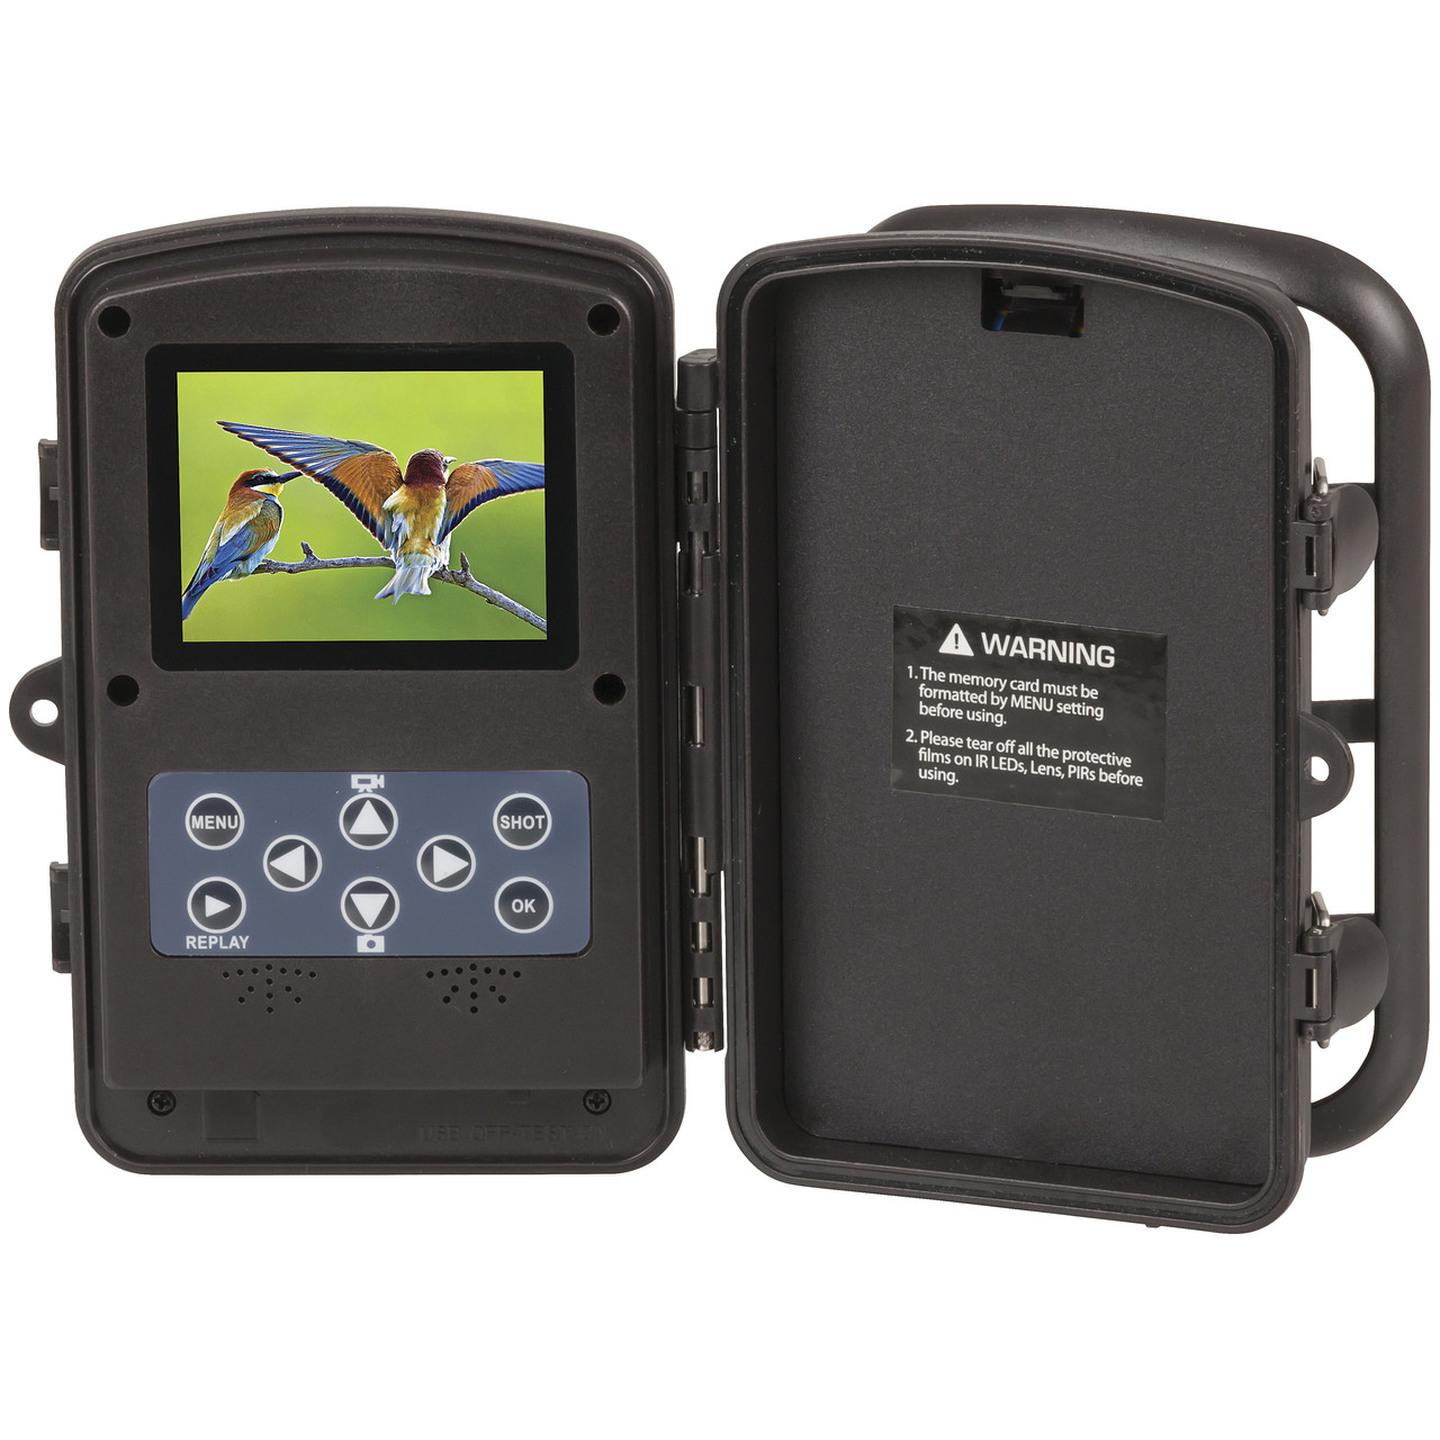 720p Outdoor Trail Camera